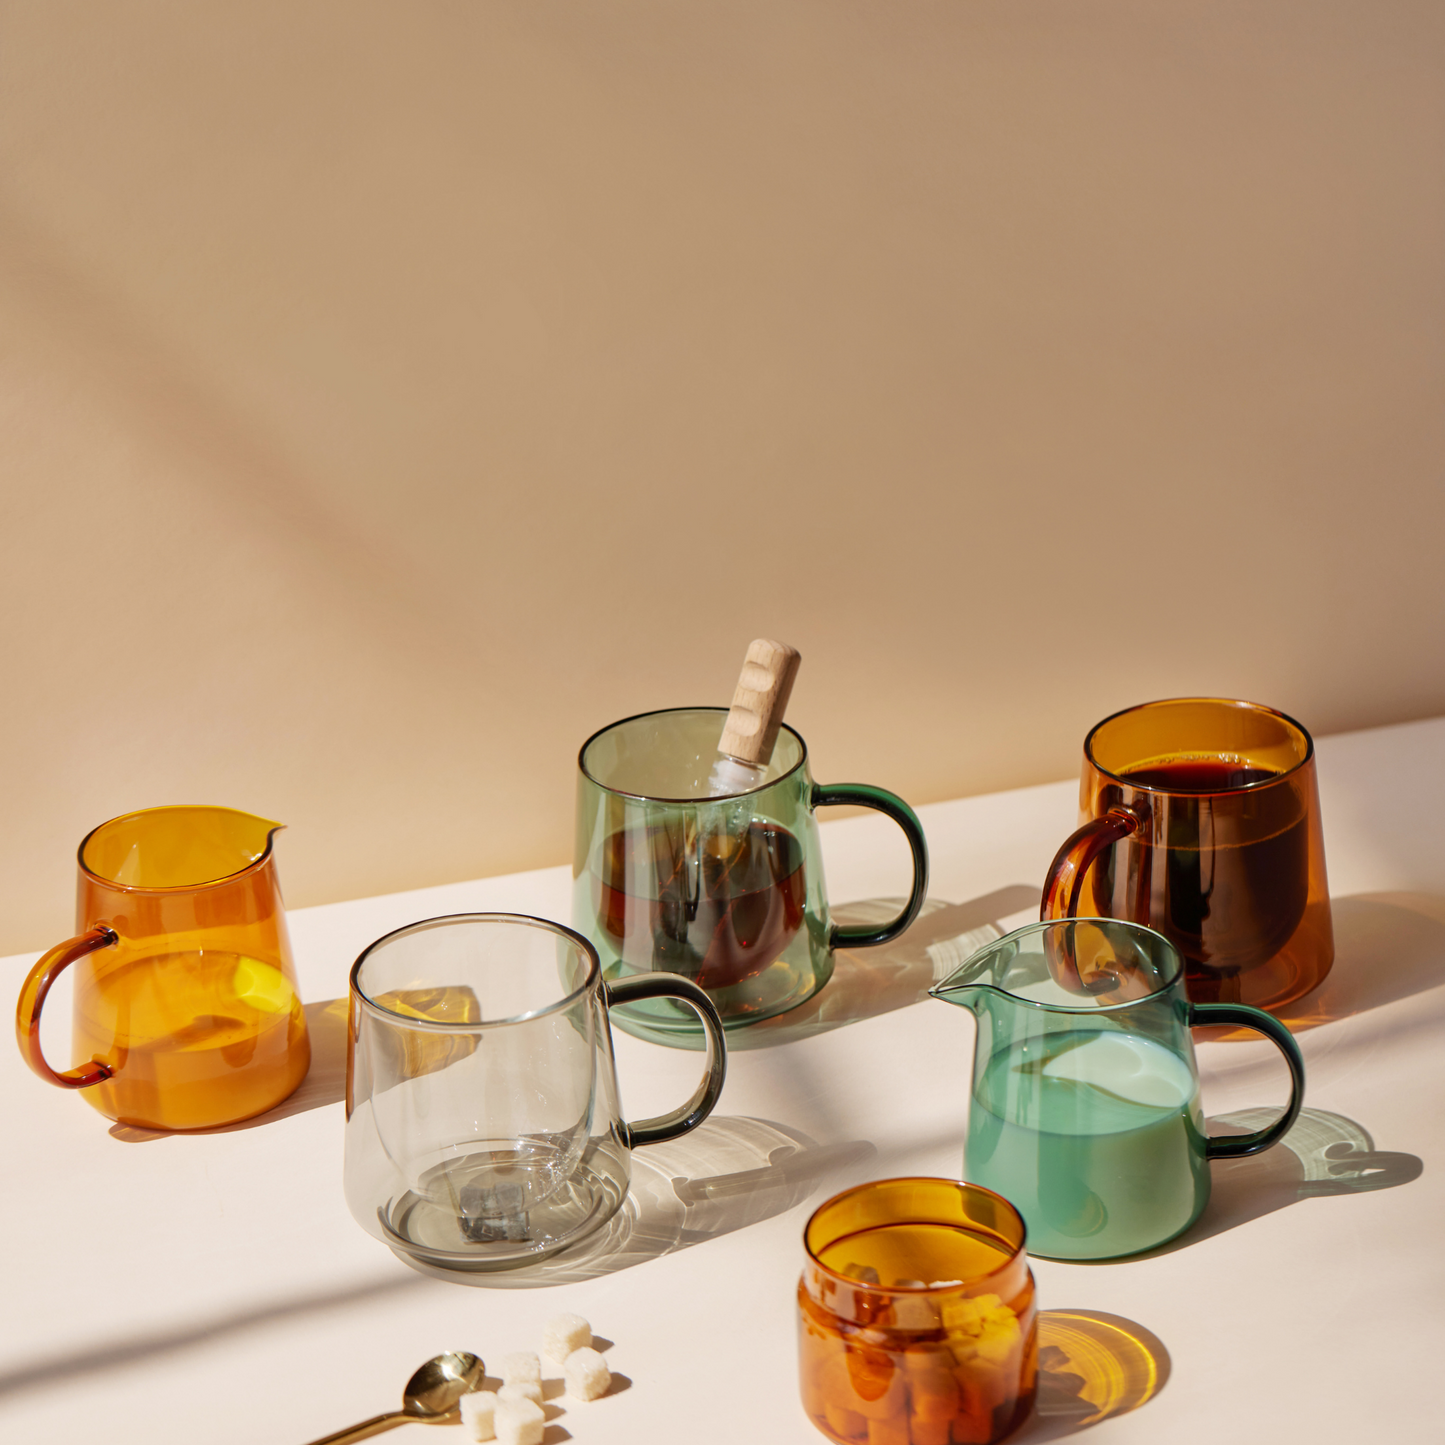 glass mugs all next to each other